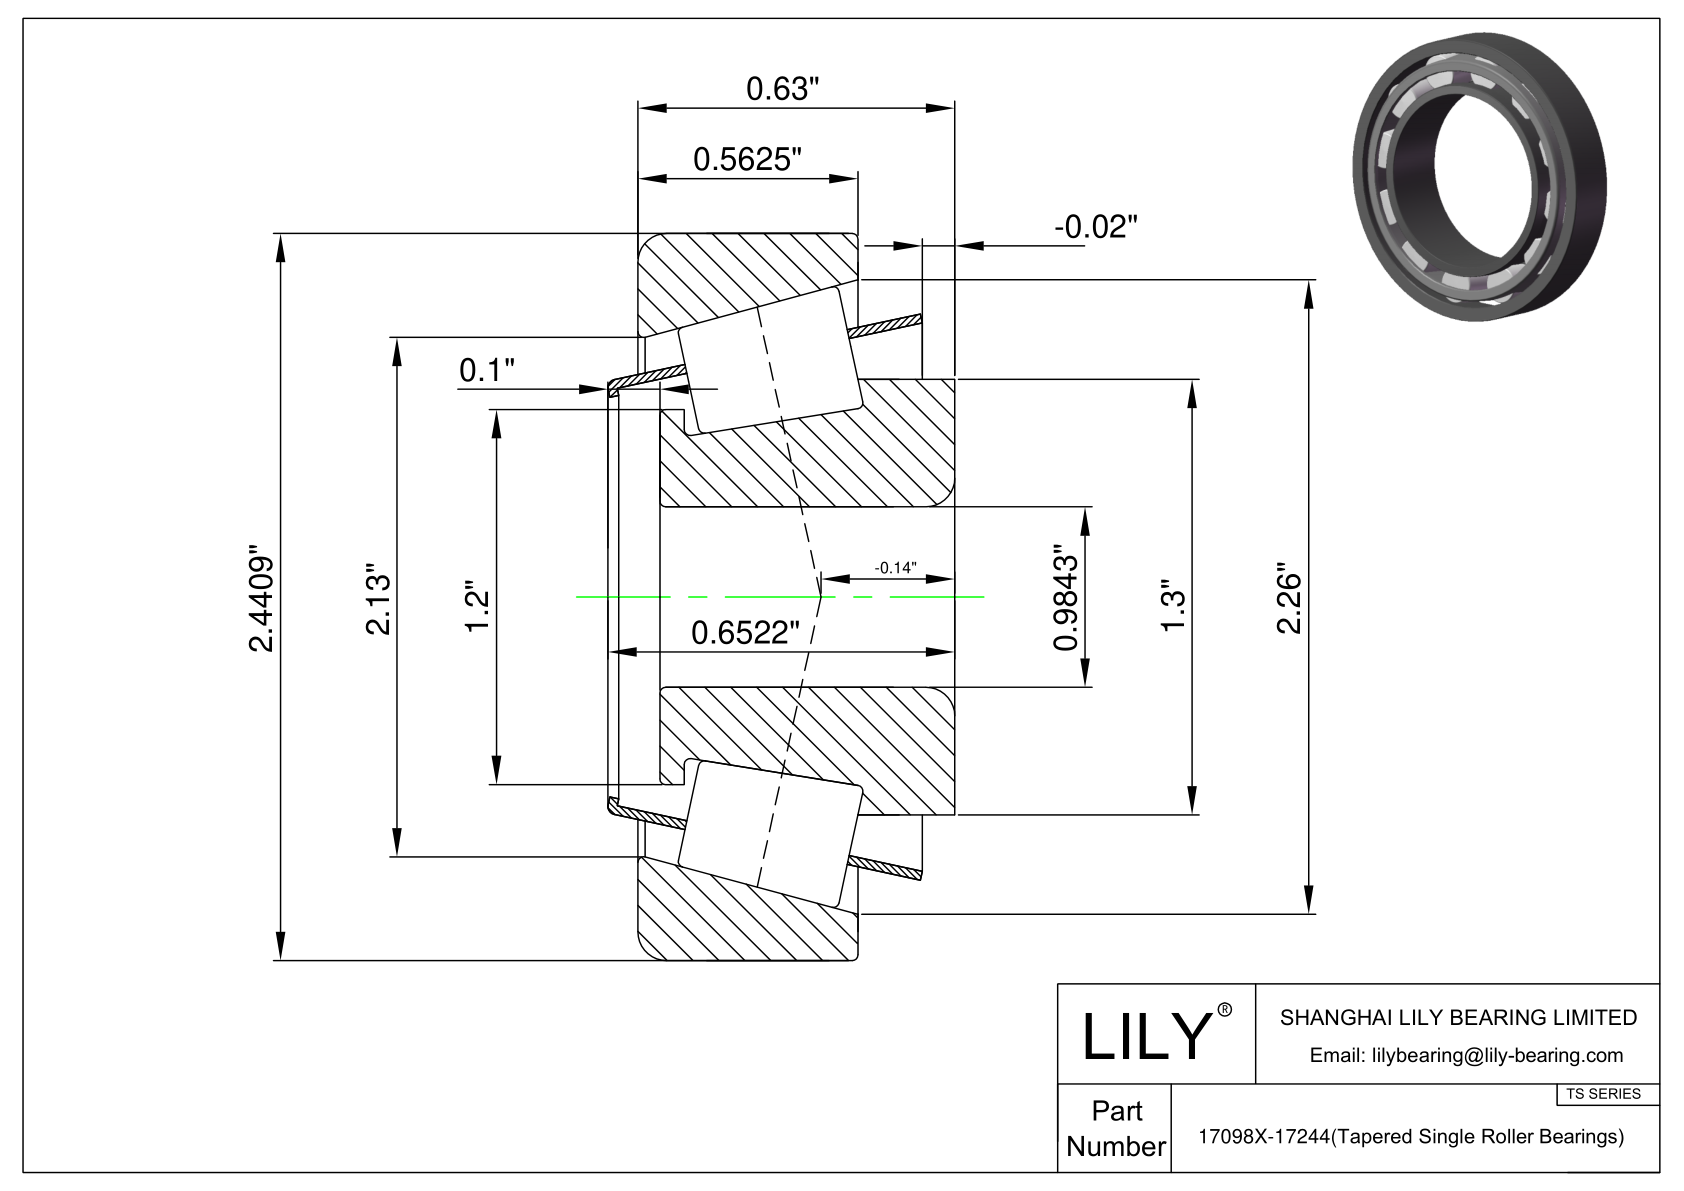 17098X-17244 TS (Tapered Single Roller Bearings) (Imperial) cad drawing